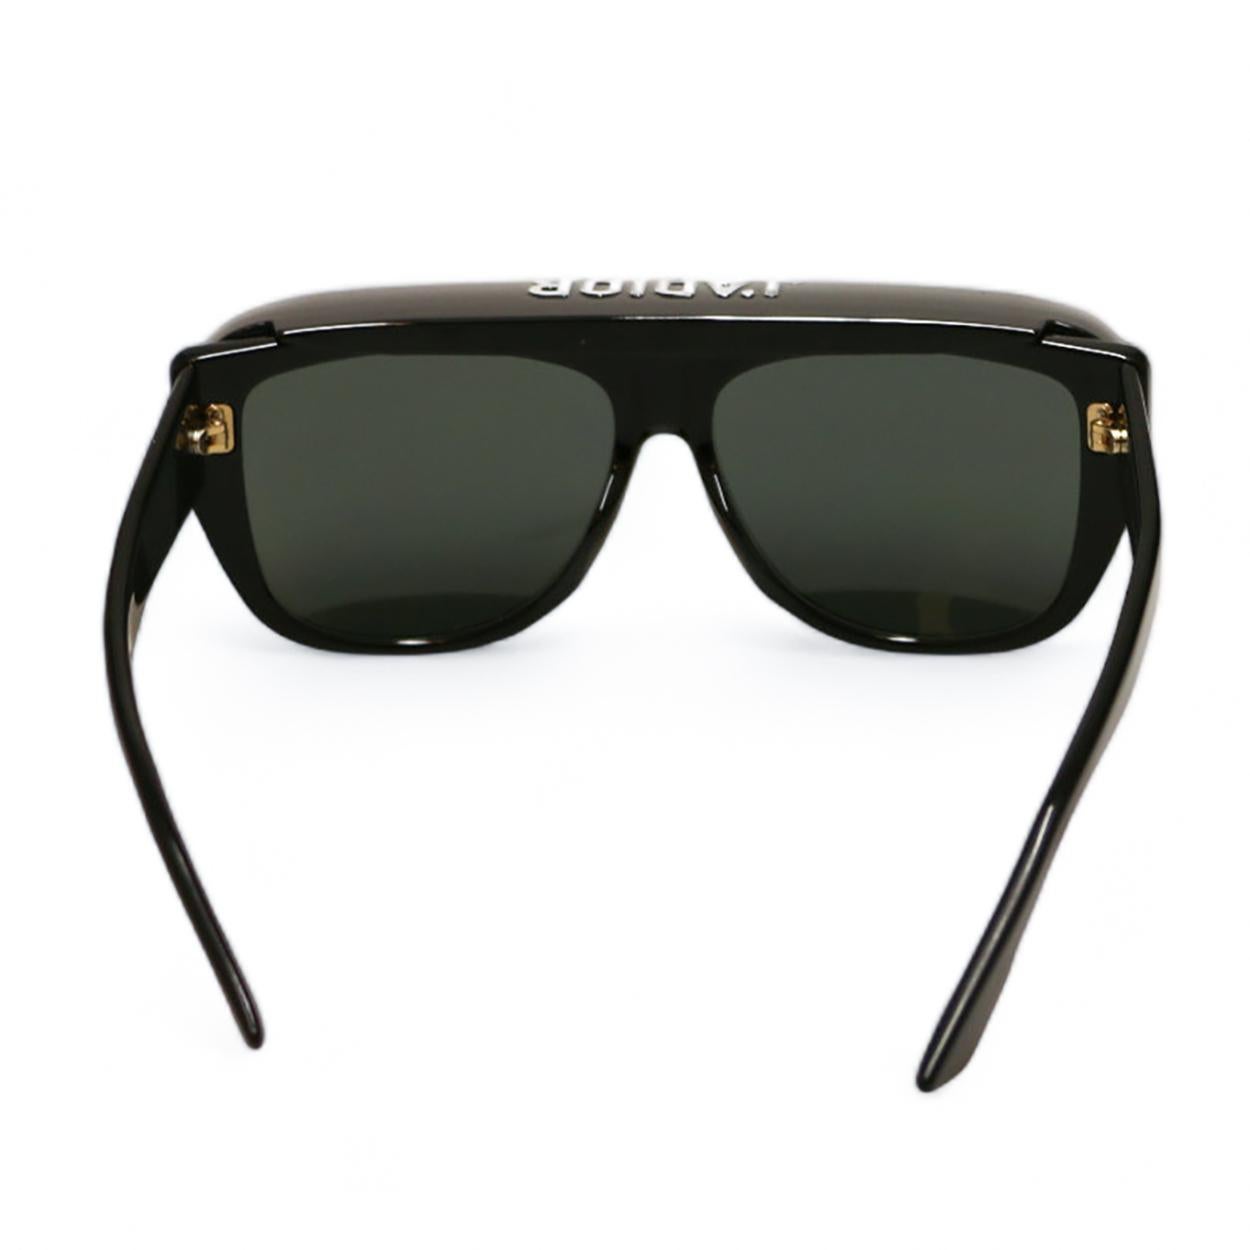 Amazing Dior sunglasses J'adior
Condition : excellent
Made in Italy
Model : women
Color : black
Material : acetate
Signature : DiorClub 2 
Serial number : yes, authenticity card
Details : delivered with the authenticity card and some cloth
Delivered